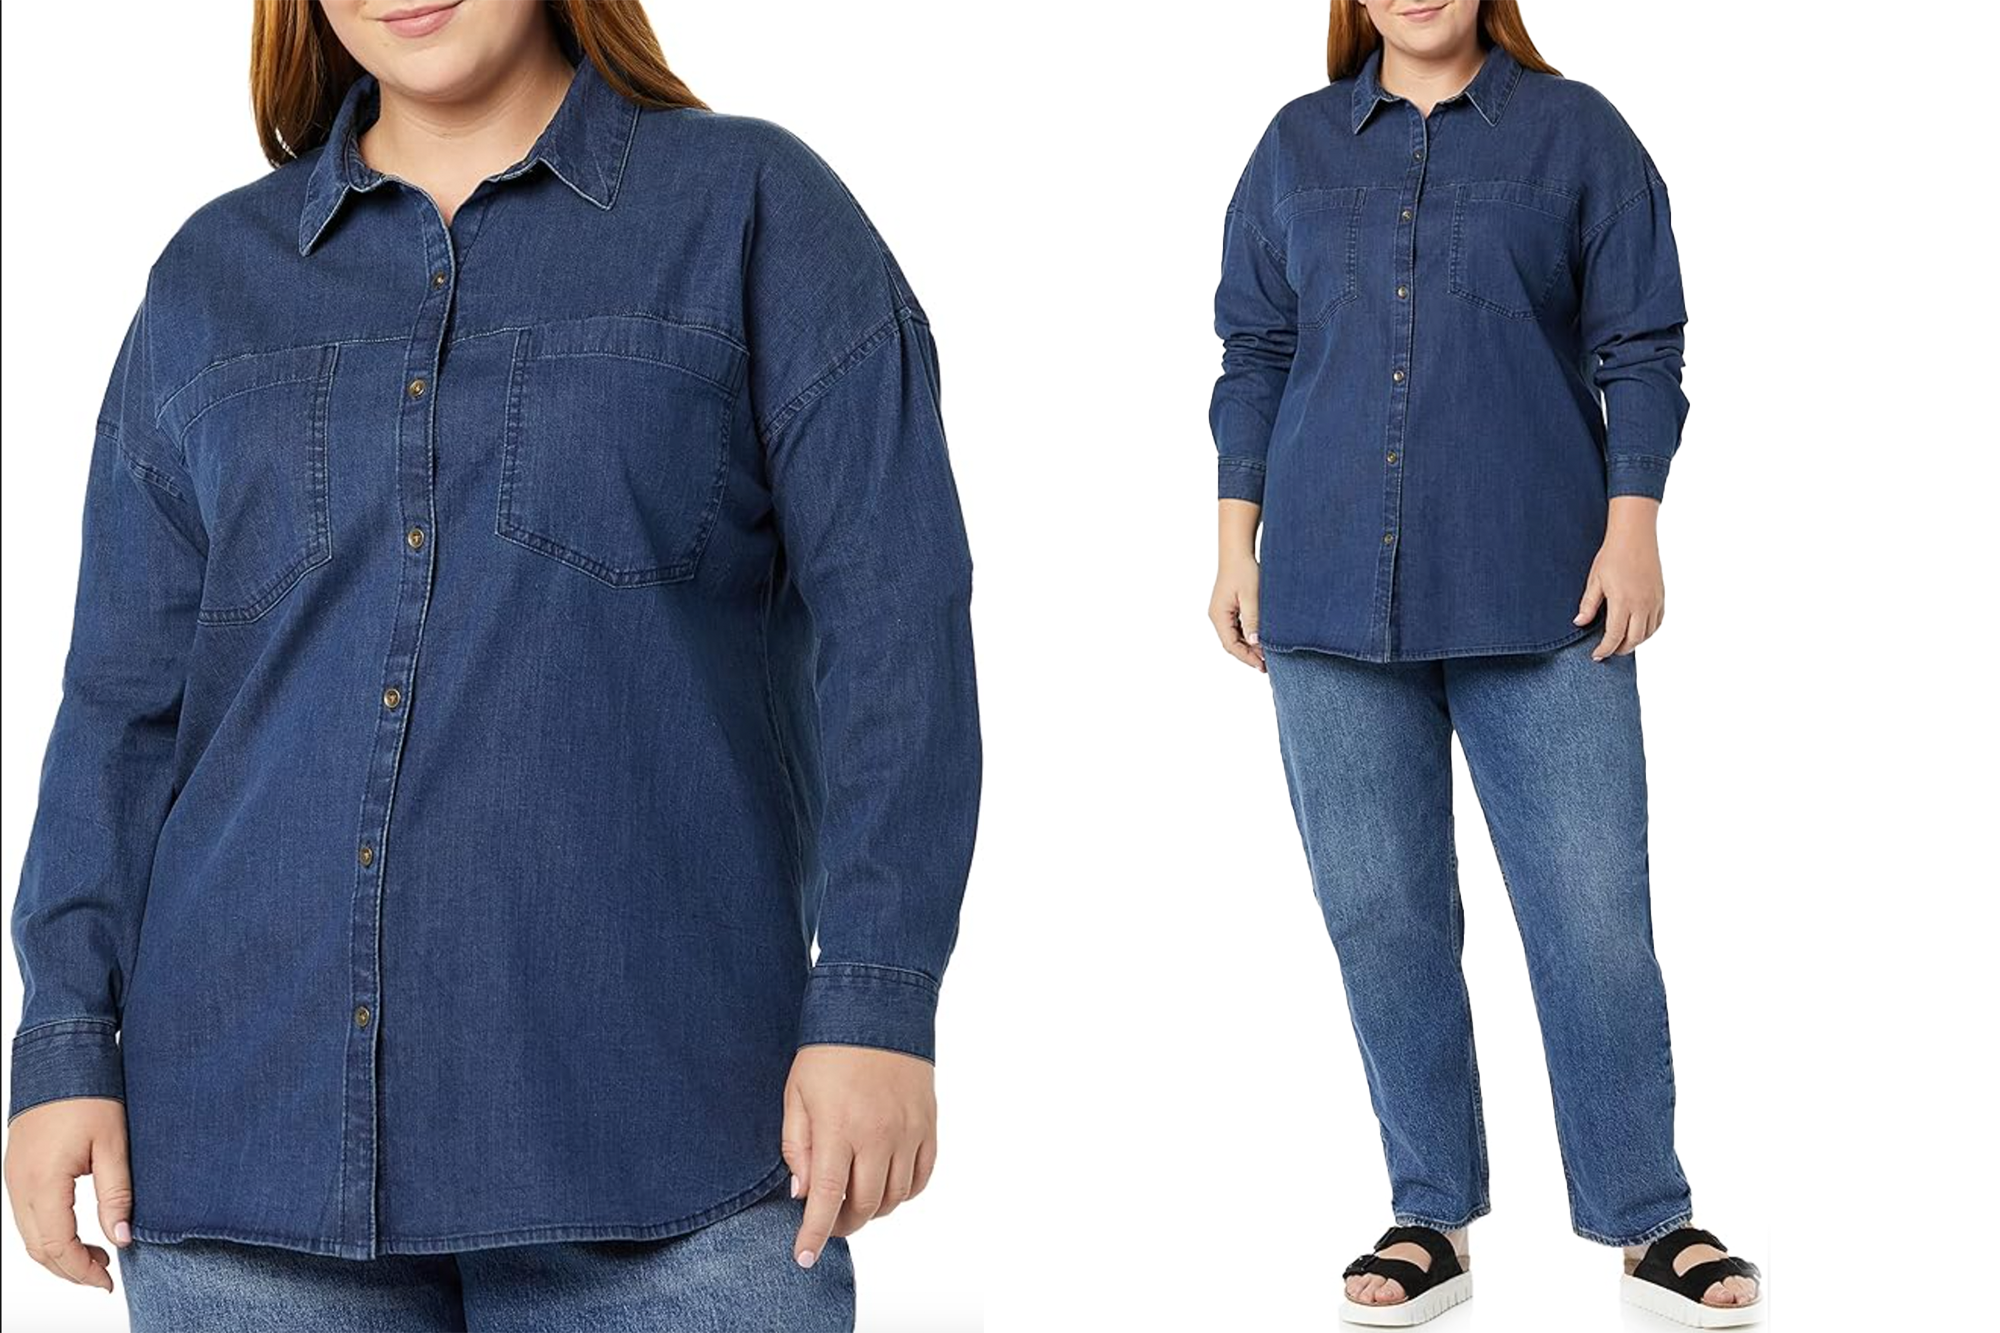 Designer Denim Mens Long Sleeve Shirts For Women Top Grade Business Sleeve  With Metal Buckle For Spring Fashion From Woman_top, $71.26 | DHgate.Com